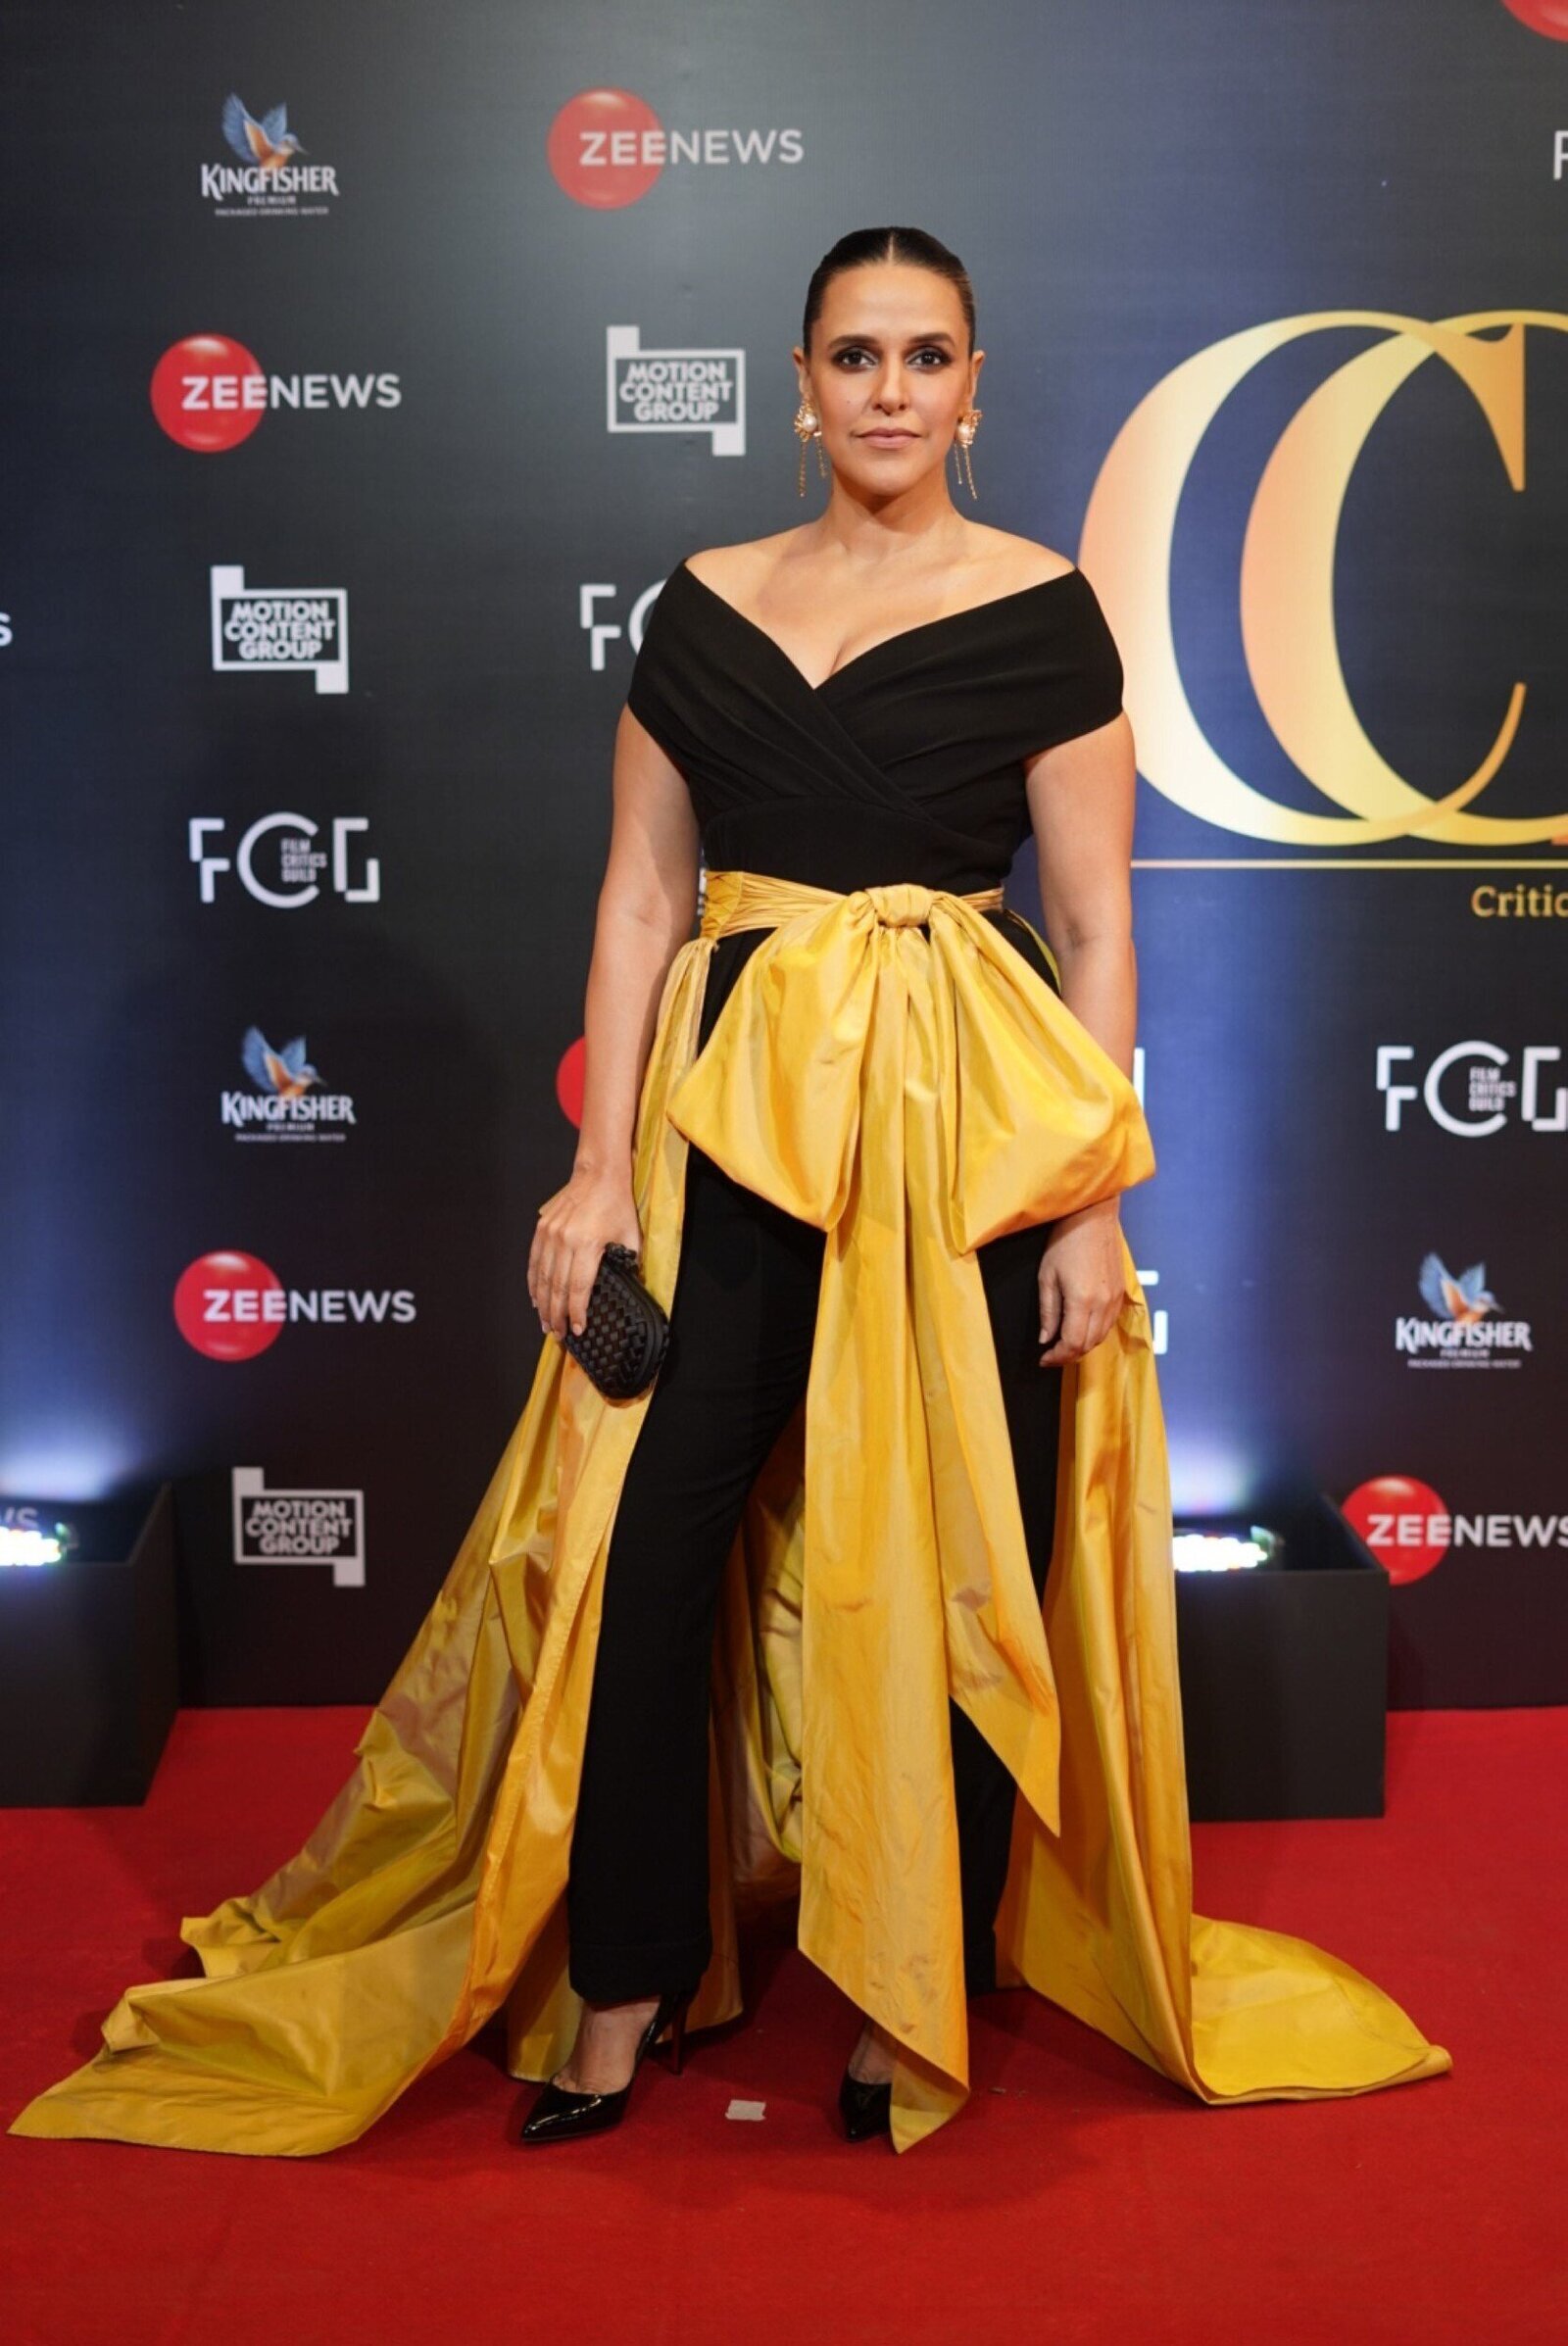 Neha Dhupia - Photos: Celebs At Red Carpet Of The 5th Edition Of Critics Choice Awards | Picture 1933067